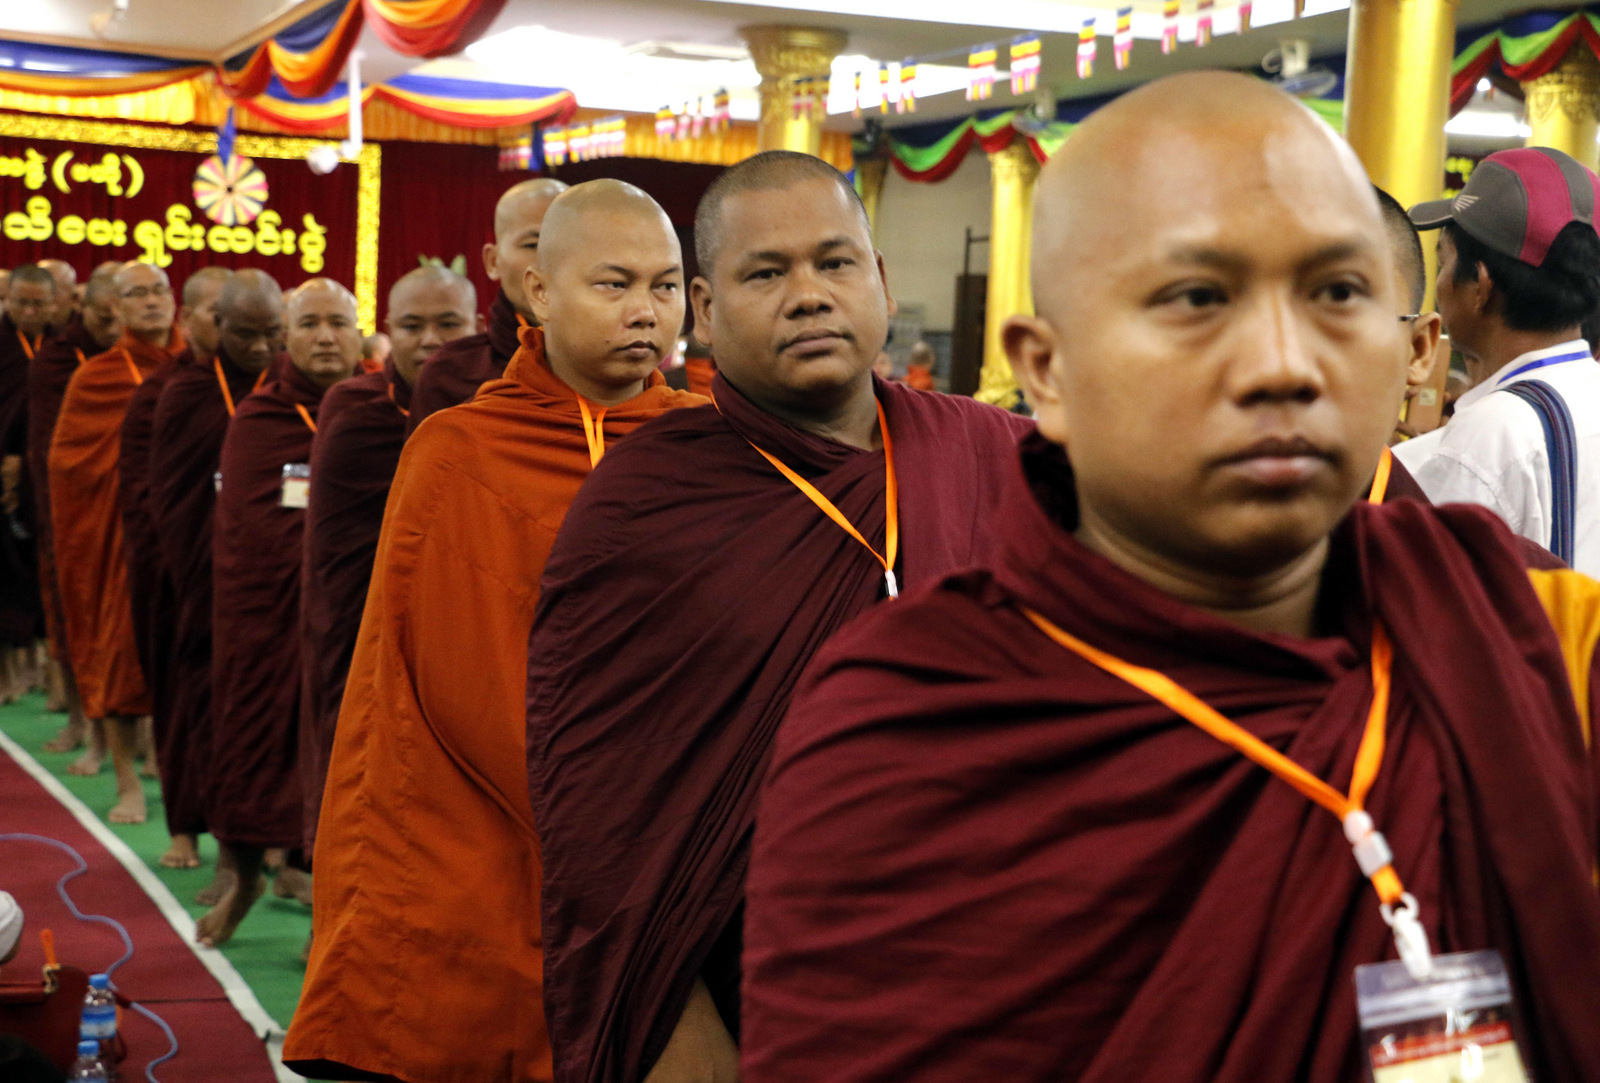 Myanmar Buddhist monks leave the venue for a break during the 4th anniversary of the nationwide meeting at a monastery, May 27, 2017, in Yangon, Myanmar. A hardline nationalist Buddhist group, known as the Ma Ba Tha, began a two-day long nationwide conference on Saturday despite the ban imposed by the country's highest Buddhist authority on all activities under the group's name. (AP/Thein Zaw)